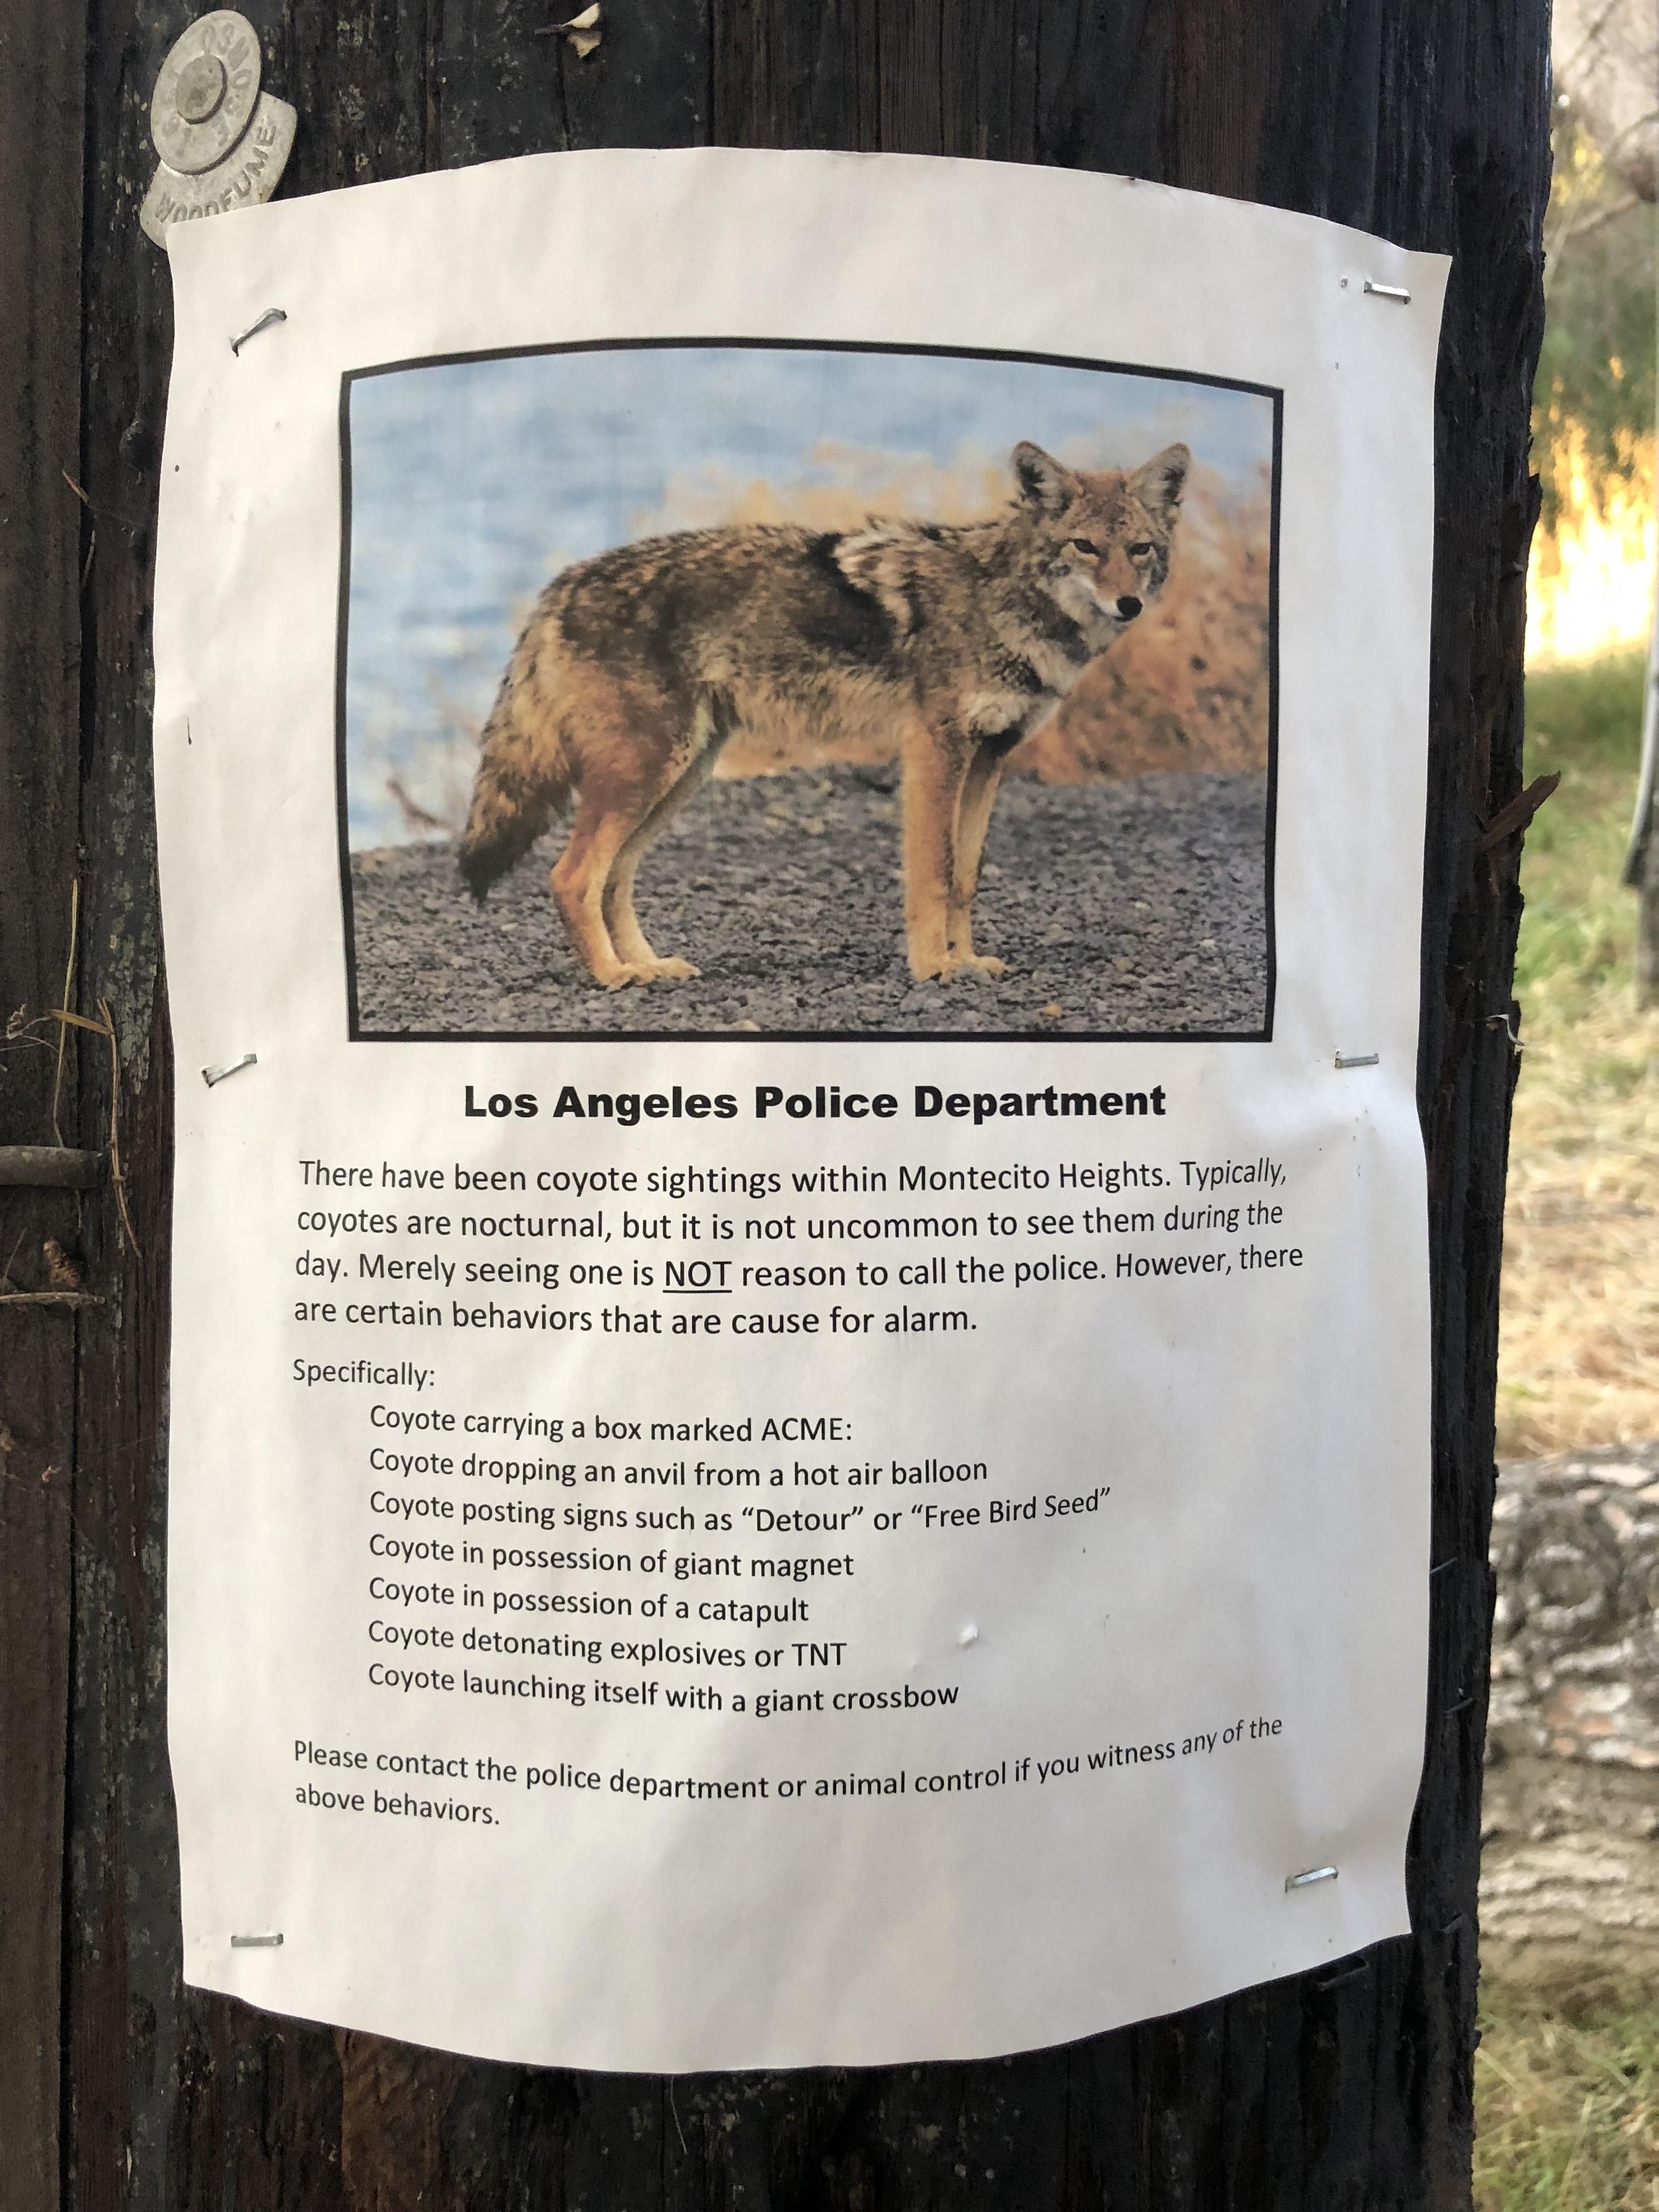 LAPD: Basically don’t call us about coyotes.